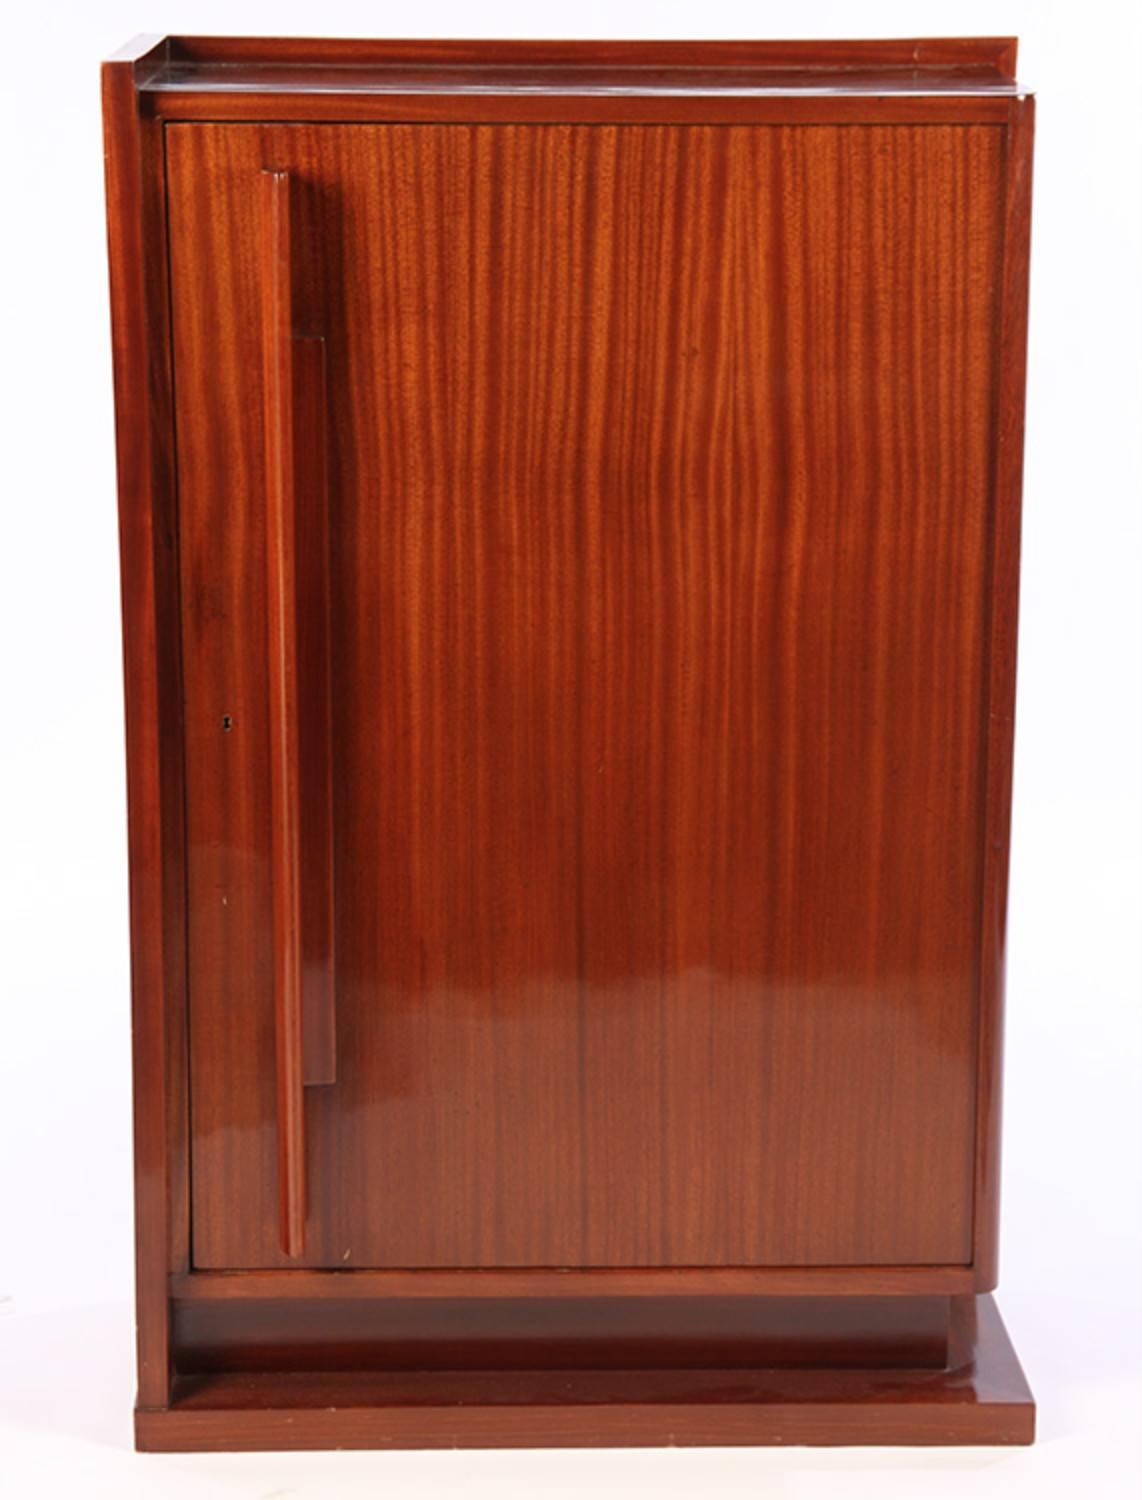 French Art Deco modernist cabinet by Andre Sornay in African mahogany. Detailed with storage shelving interior. Measures: 32